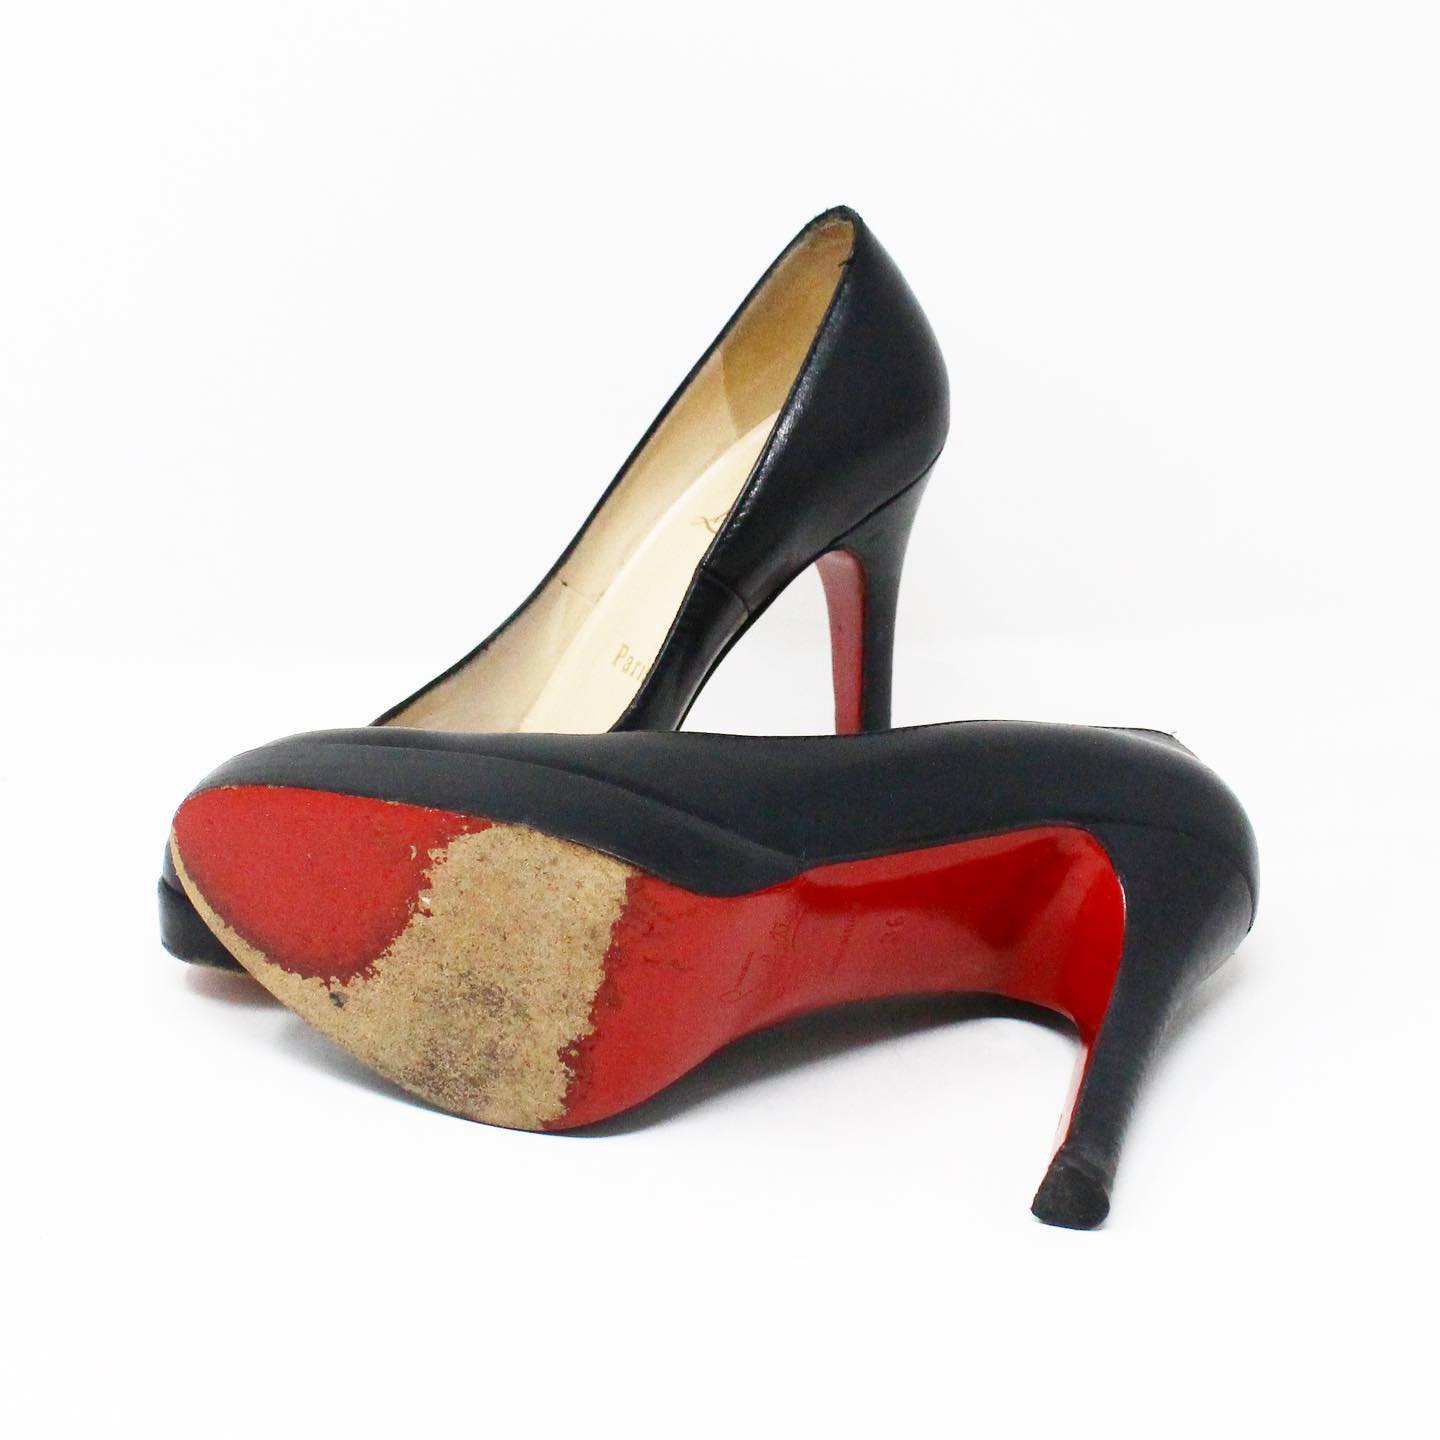 Christian Louboutin Authenticated Suede Heel